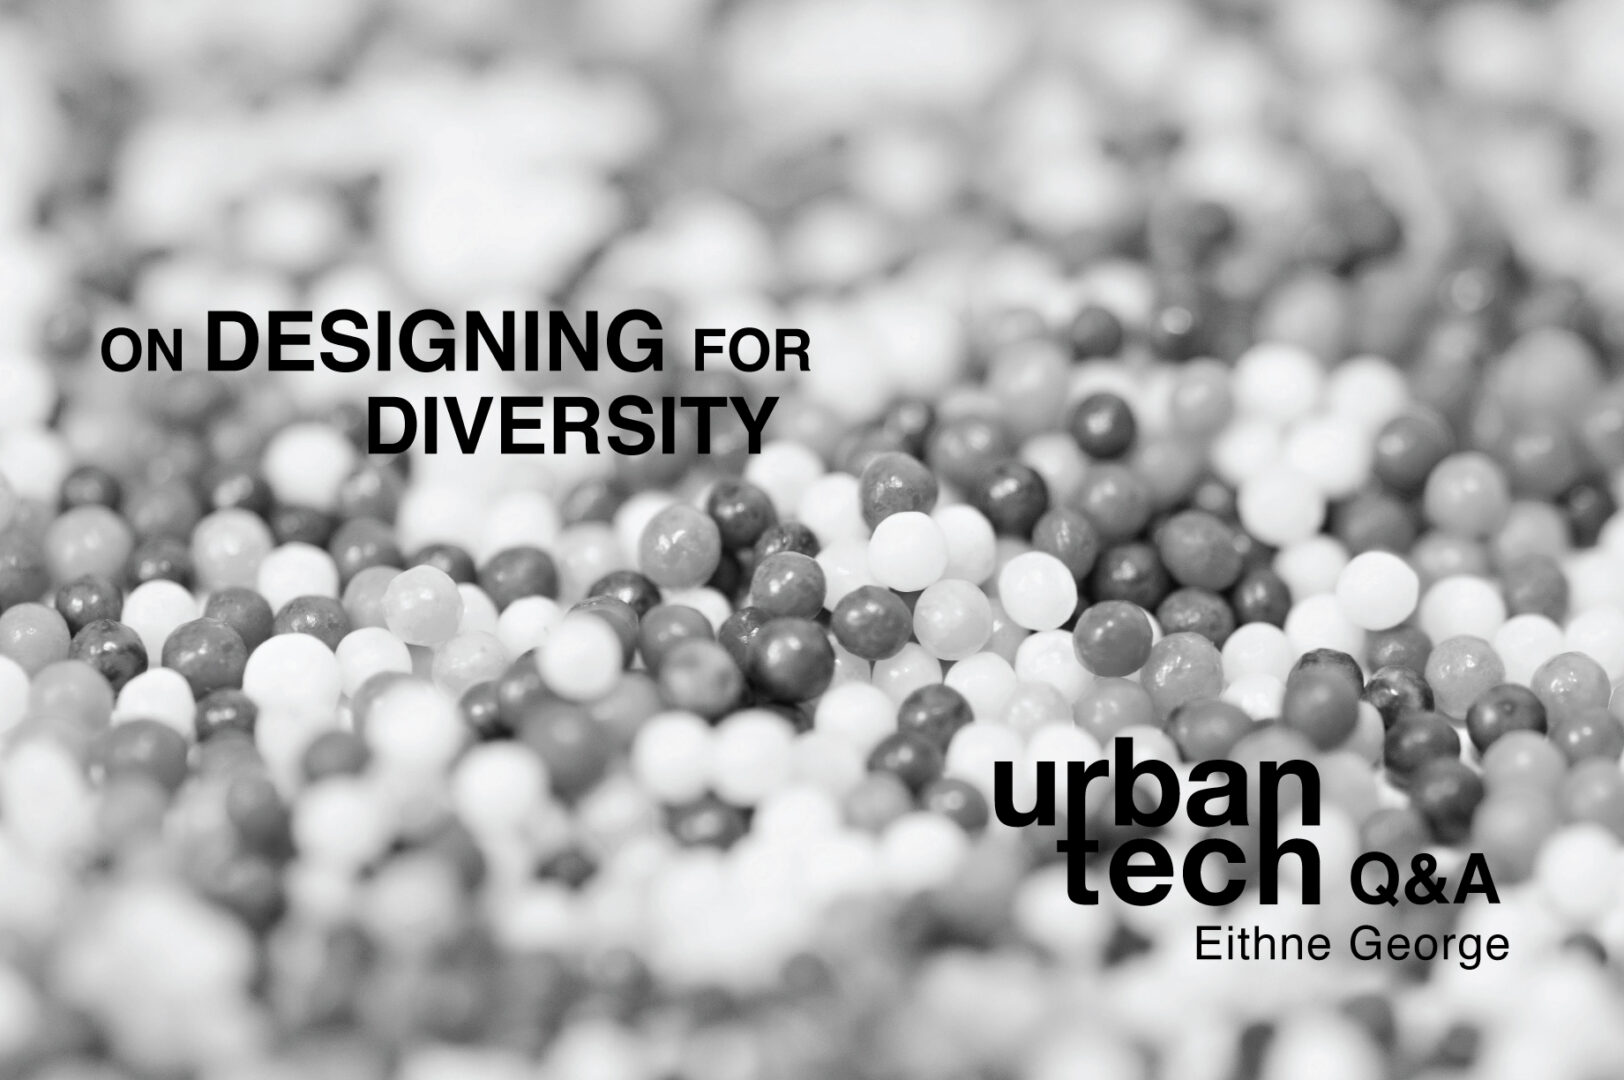 on designing for diversity - urbantech q&a with Eithne George